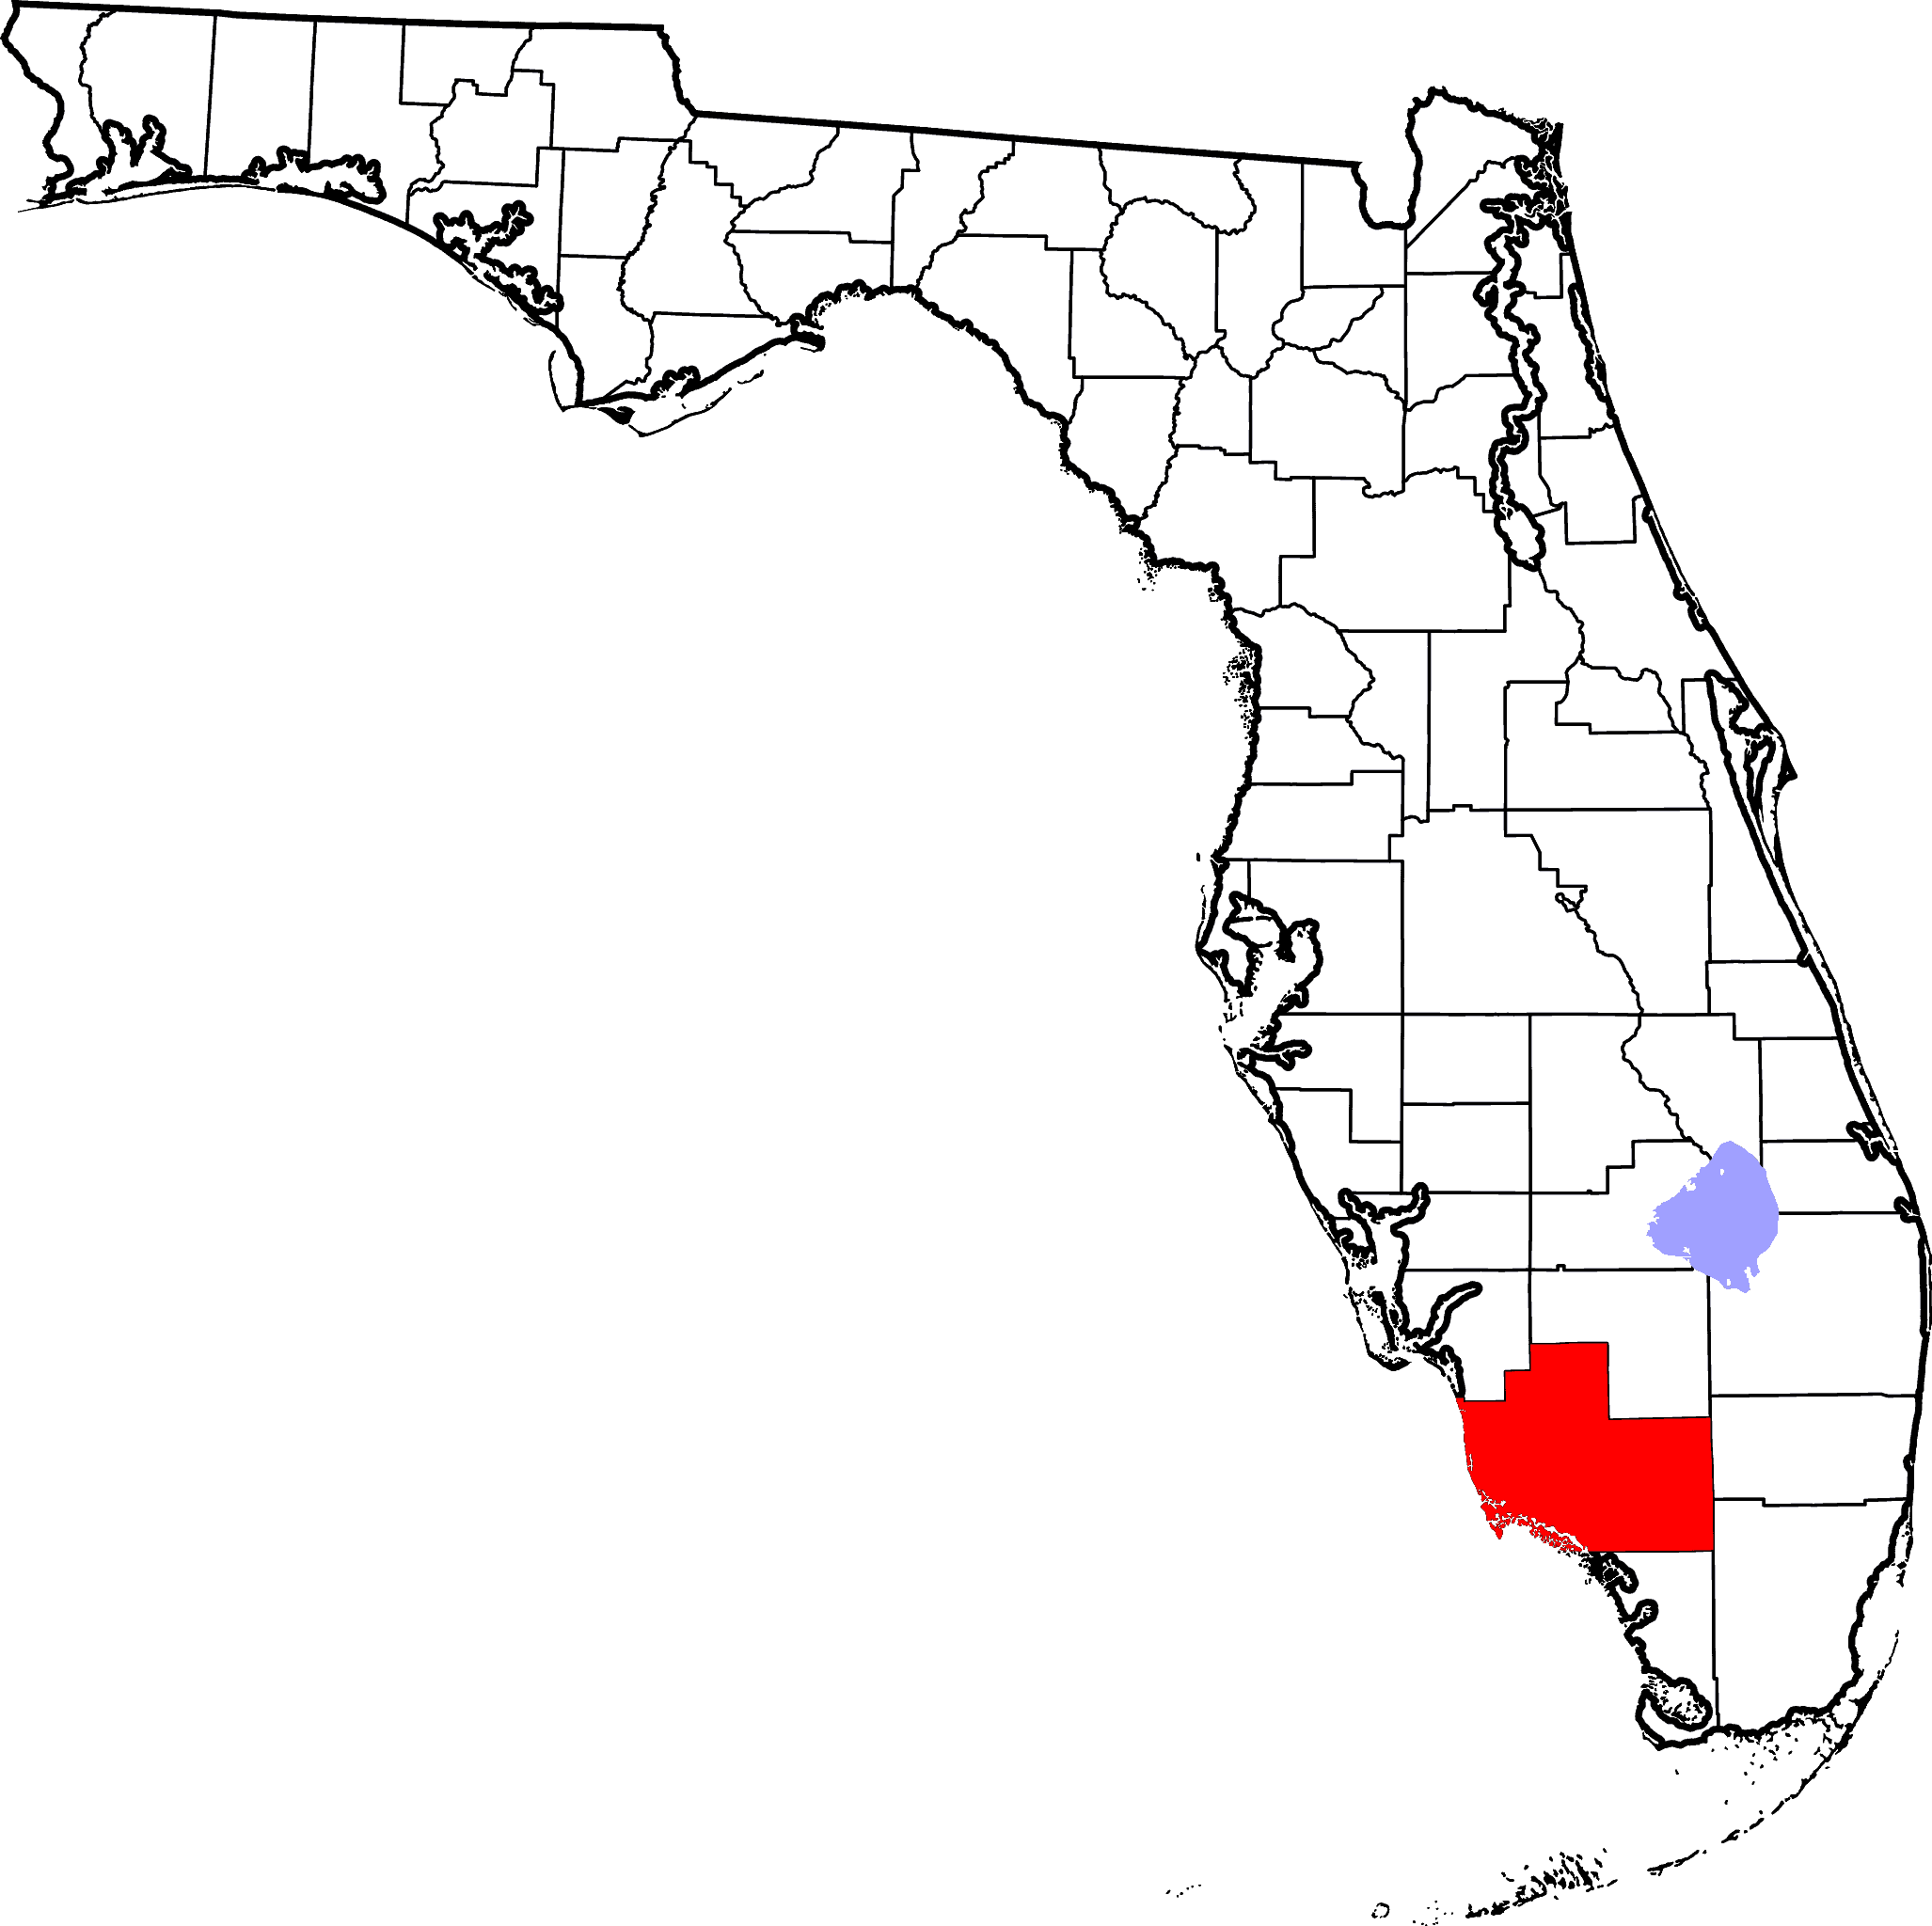 Map of Florida highlighting Collier County